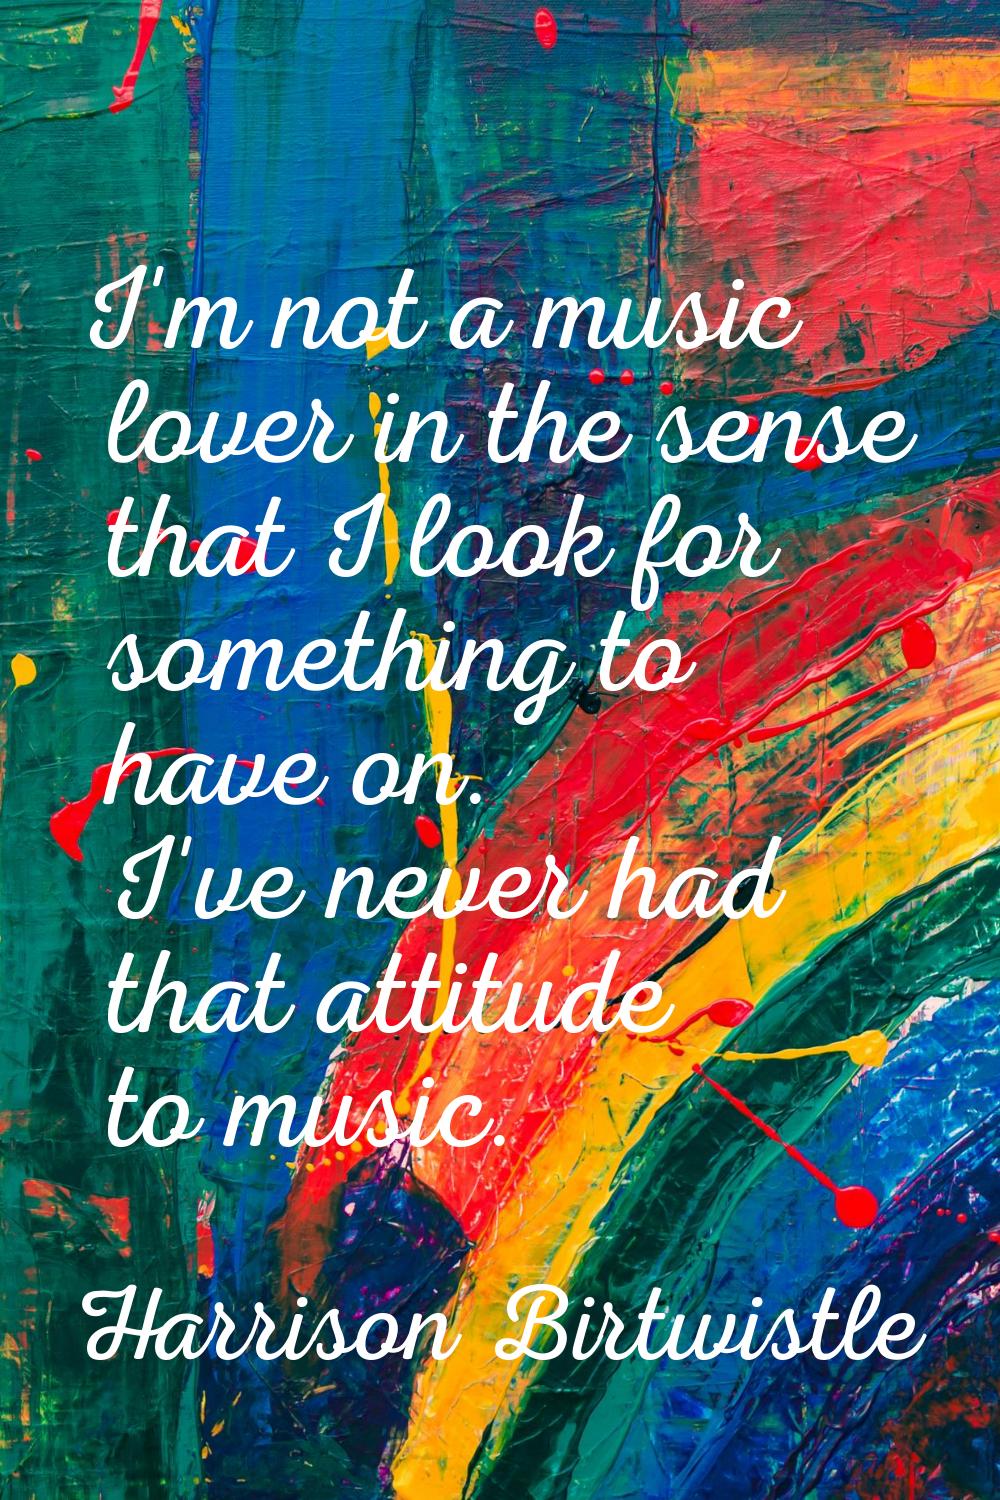 I'm not a music lover in the sense that I look for something to have on. I've never had that attitu